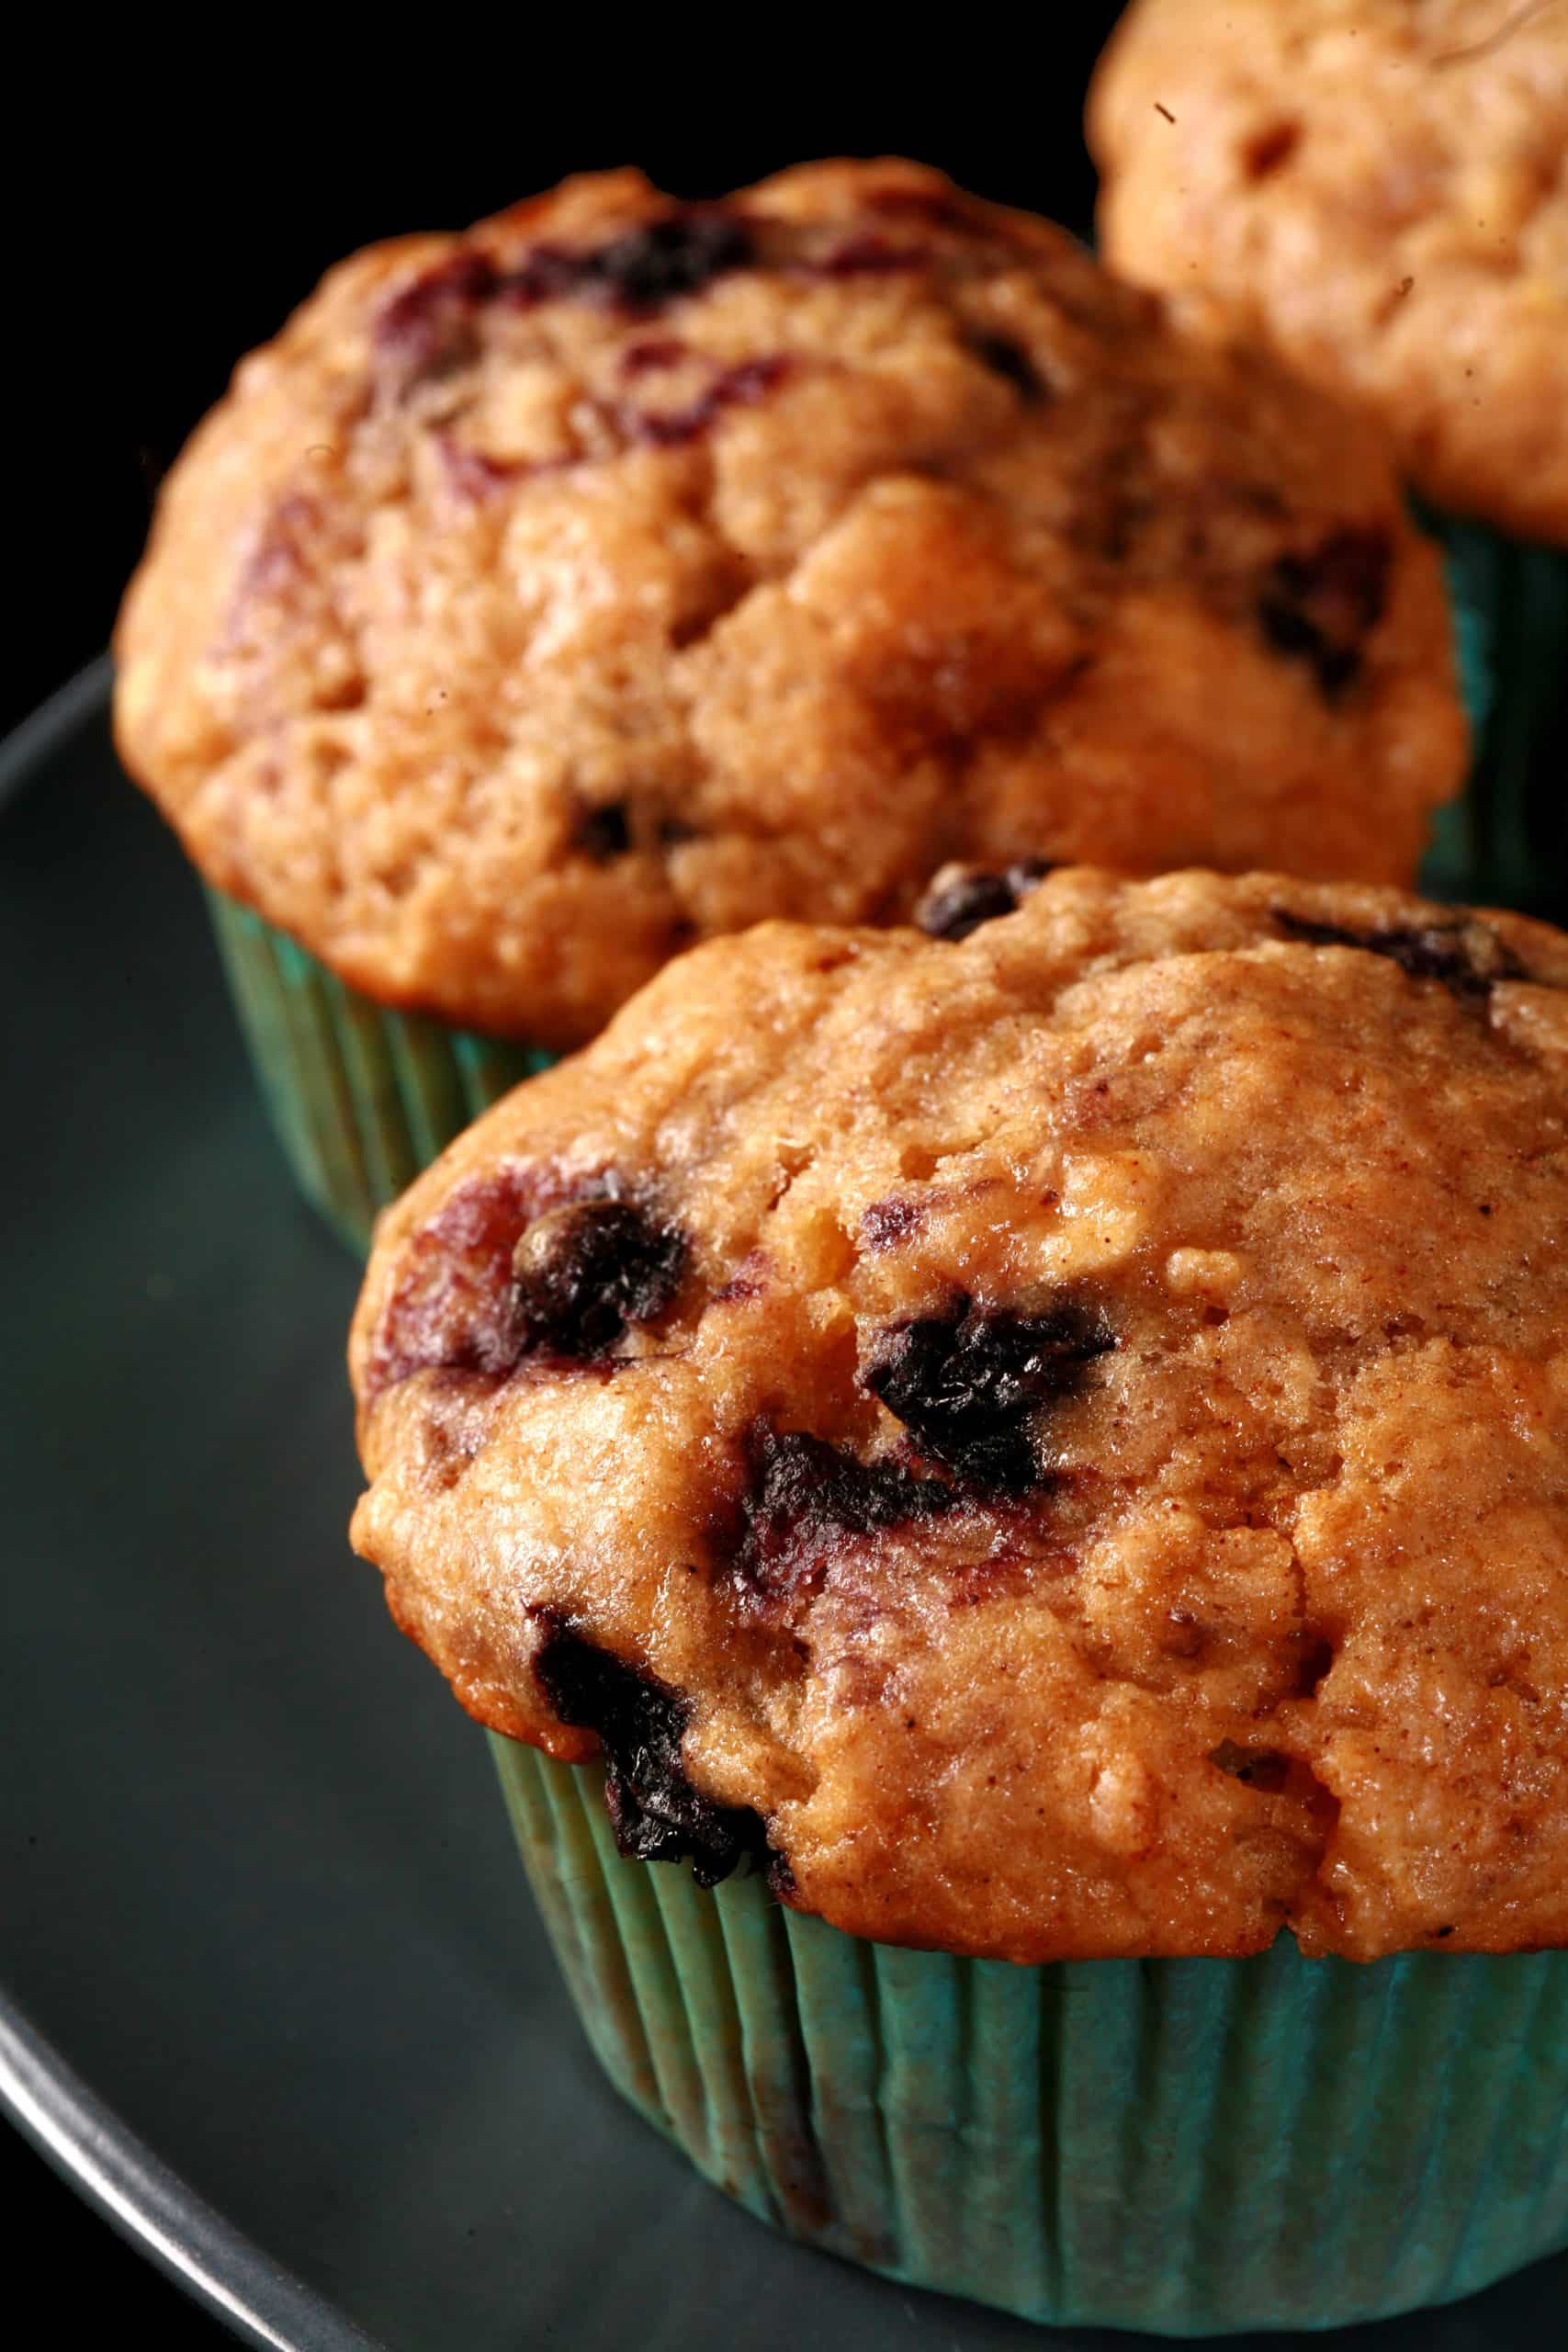 A plate of apple blueberry muffins.